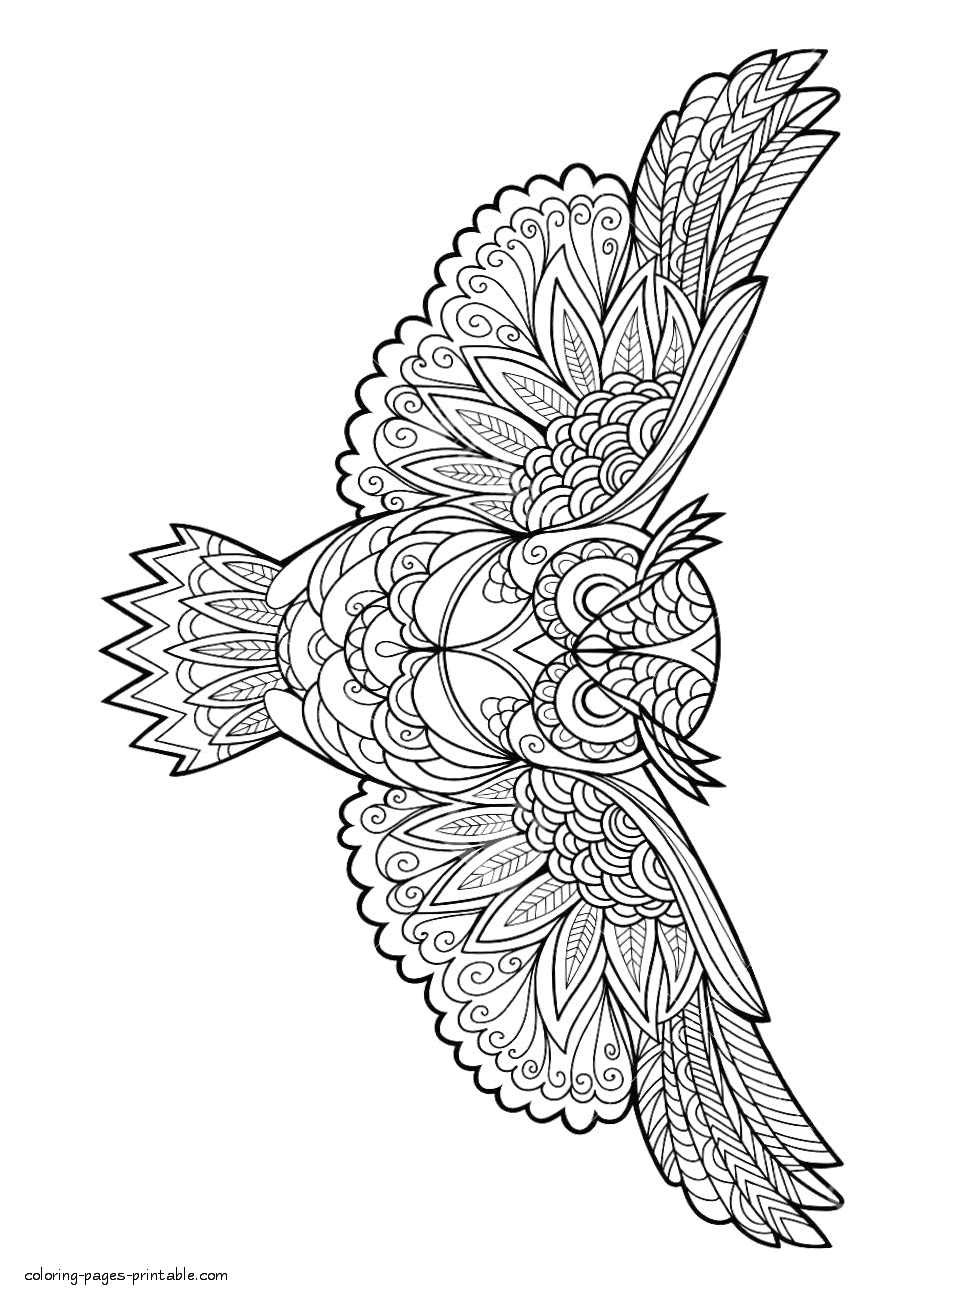 Download Bird Coloring Book For Adults || COLORING-PAGES-PRINTABLE.COM